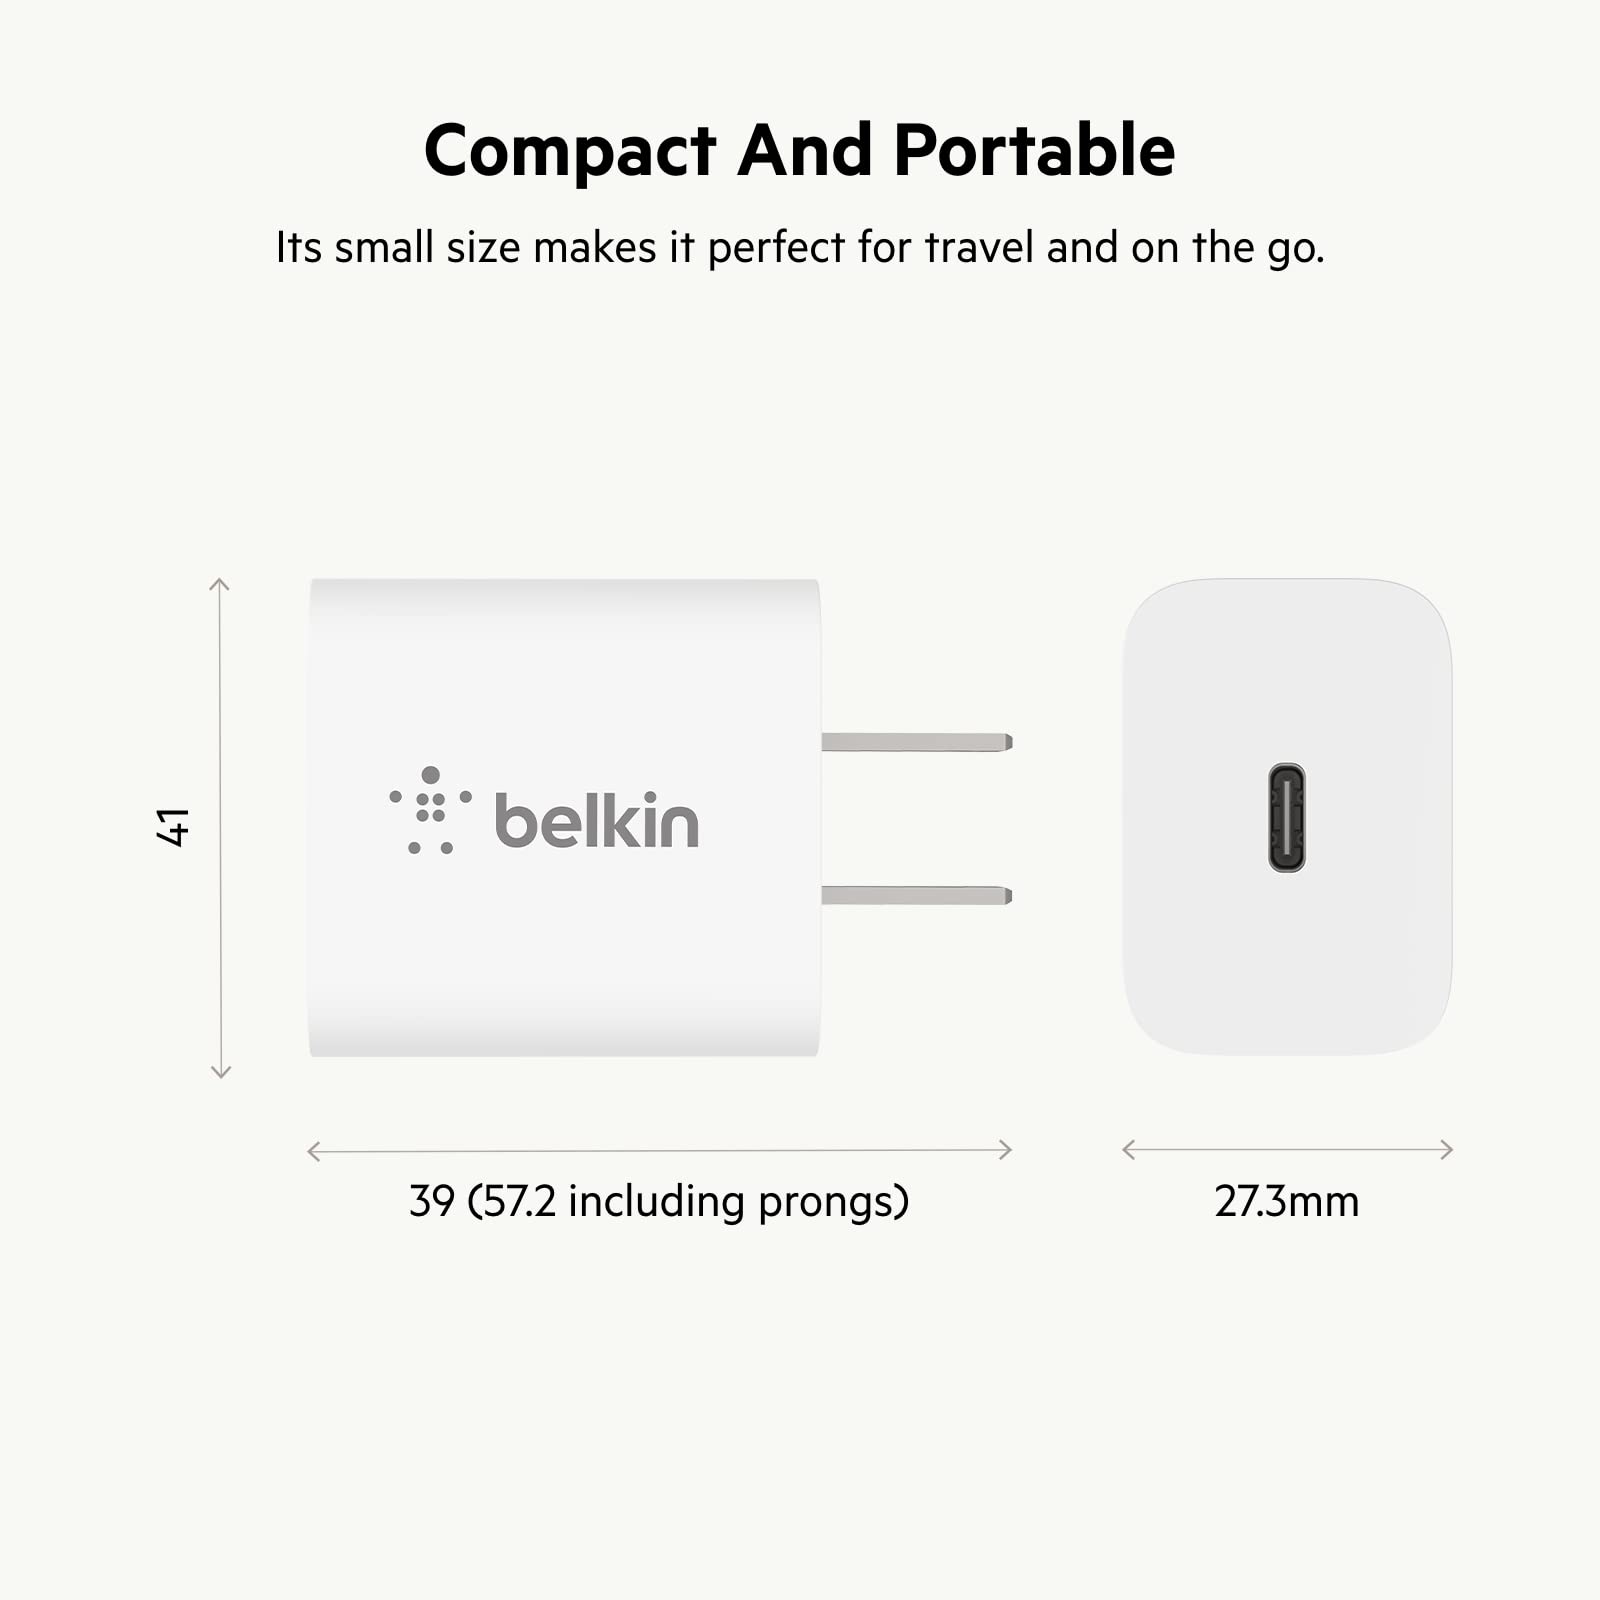 Belkin 20 Watt USB C Wall Charger - USB Type C Charger Fast Charging for Apple iPhone 14, 14 Pro, 14 Pro Max, 13, 13 Pro, 13 Pro Max, Galaxy S21 Ultra, iPad, AirPods & More - USBC Charger (1-Pack)